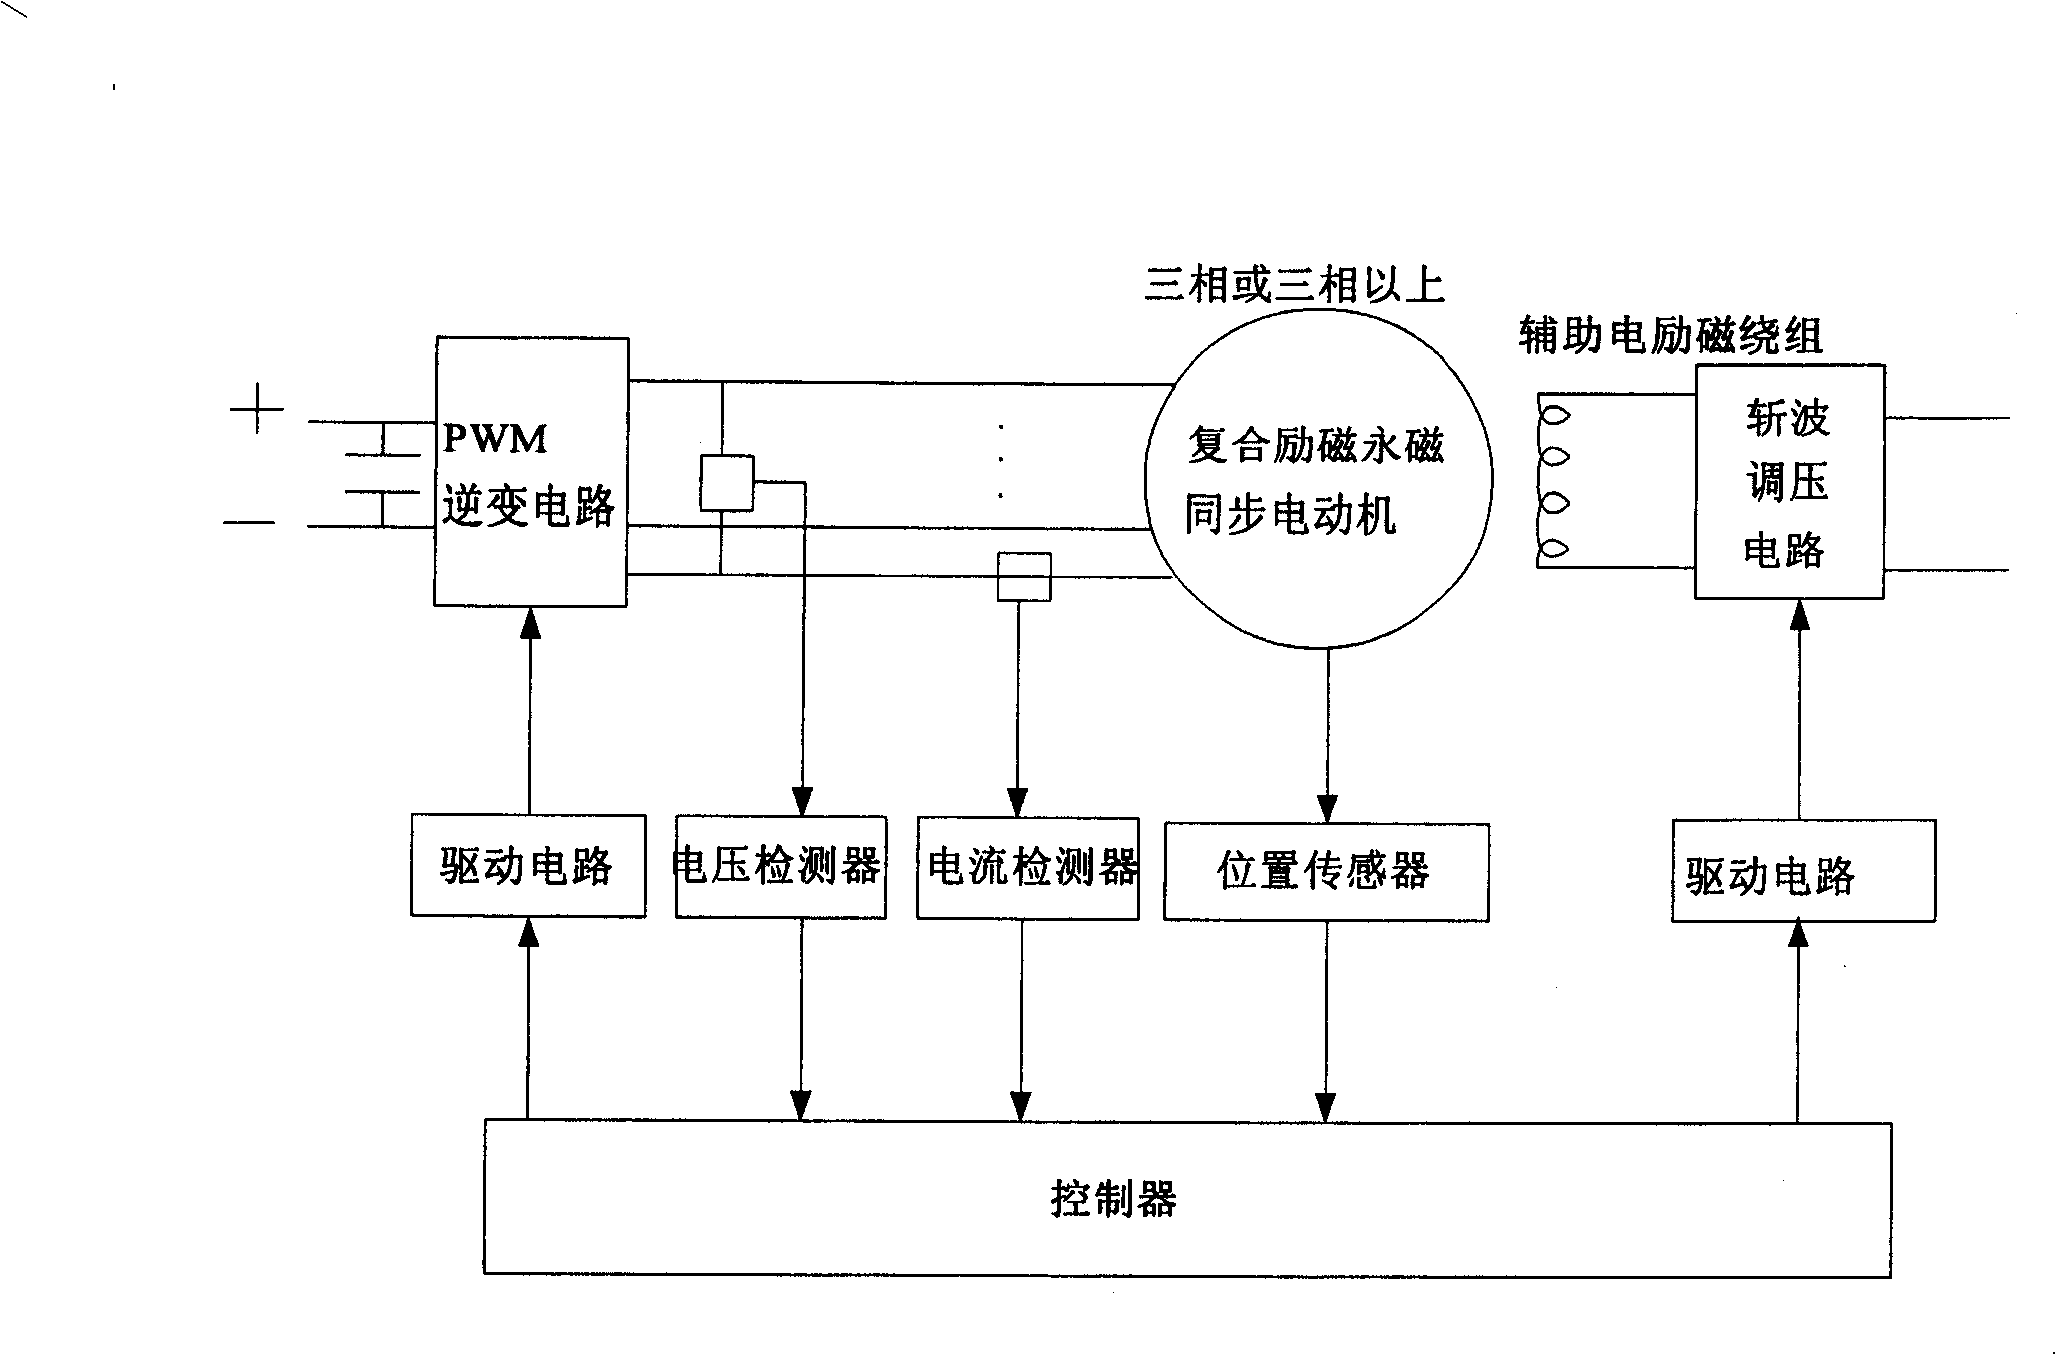 Composite excitation permanent magnet synchronous variable-speed motor